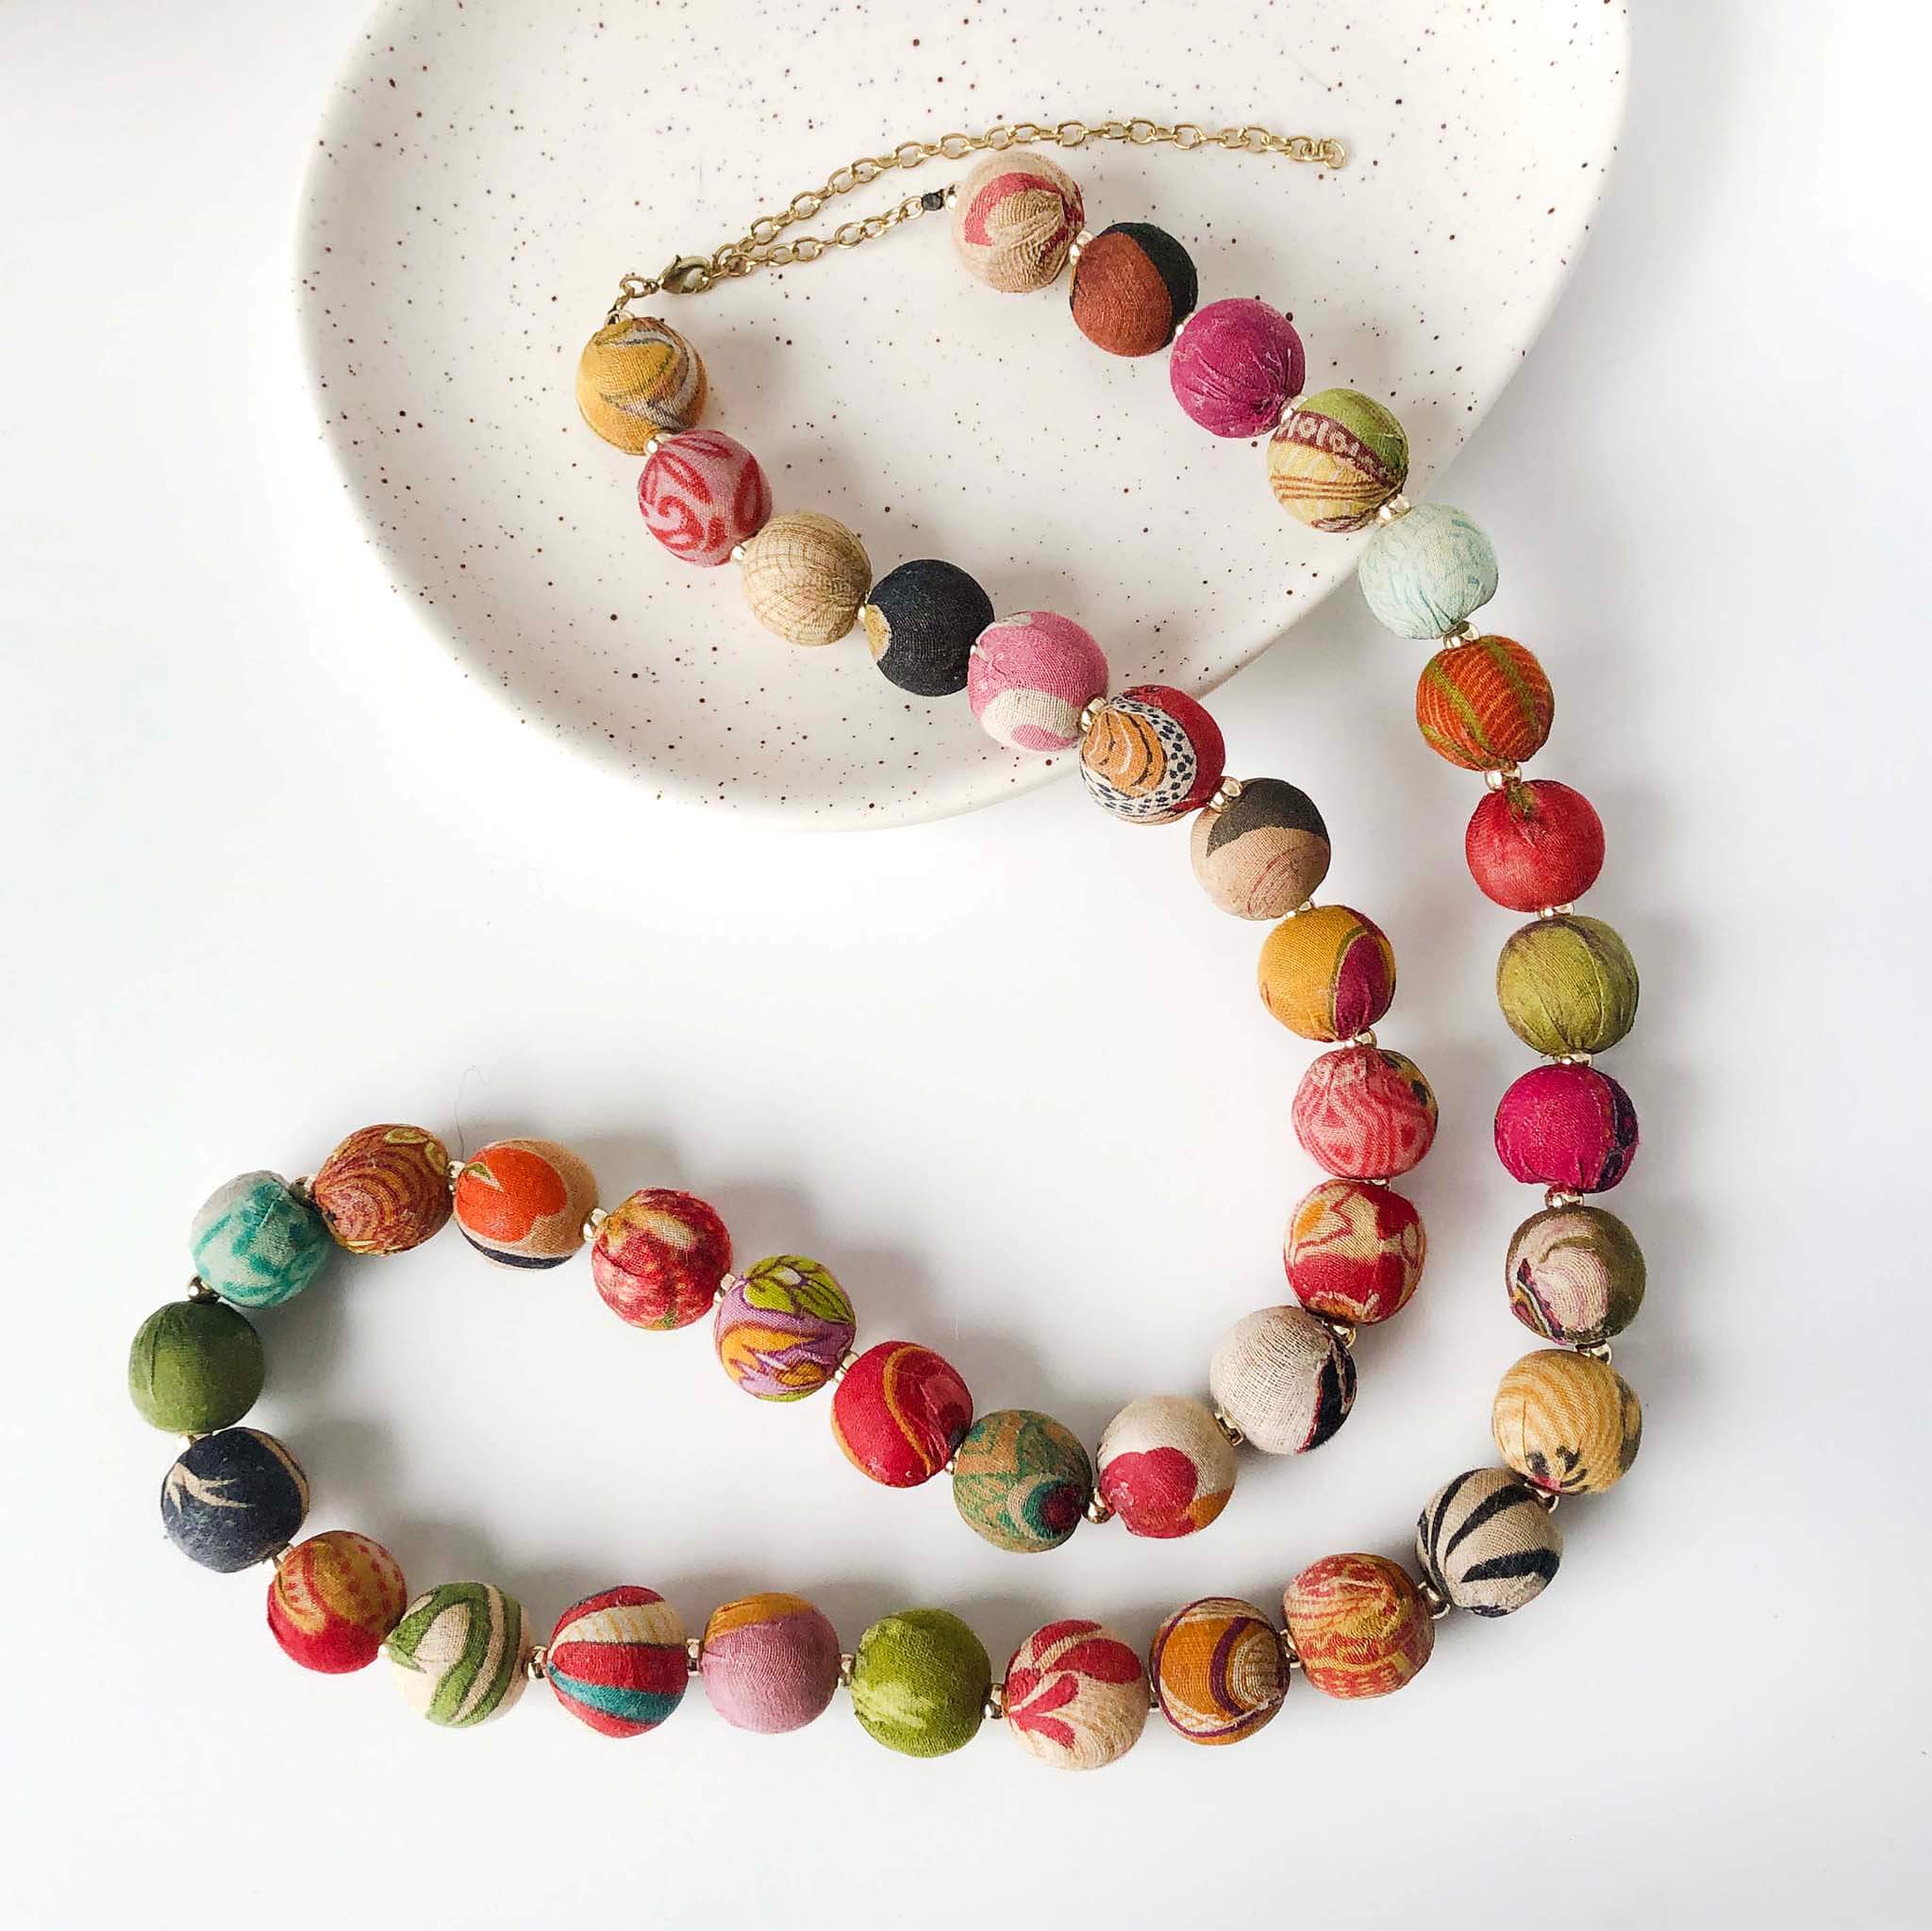 A single strand of colorful textile-covered beads winds on a table to create a necklace.